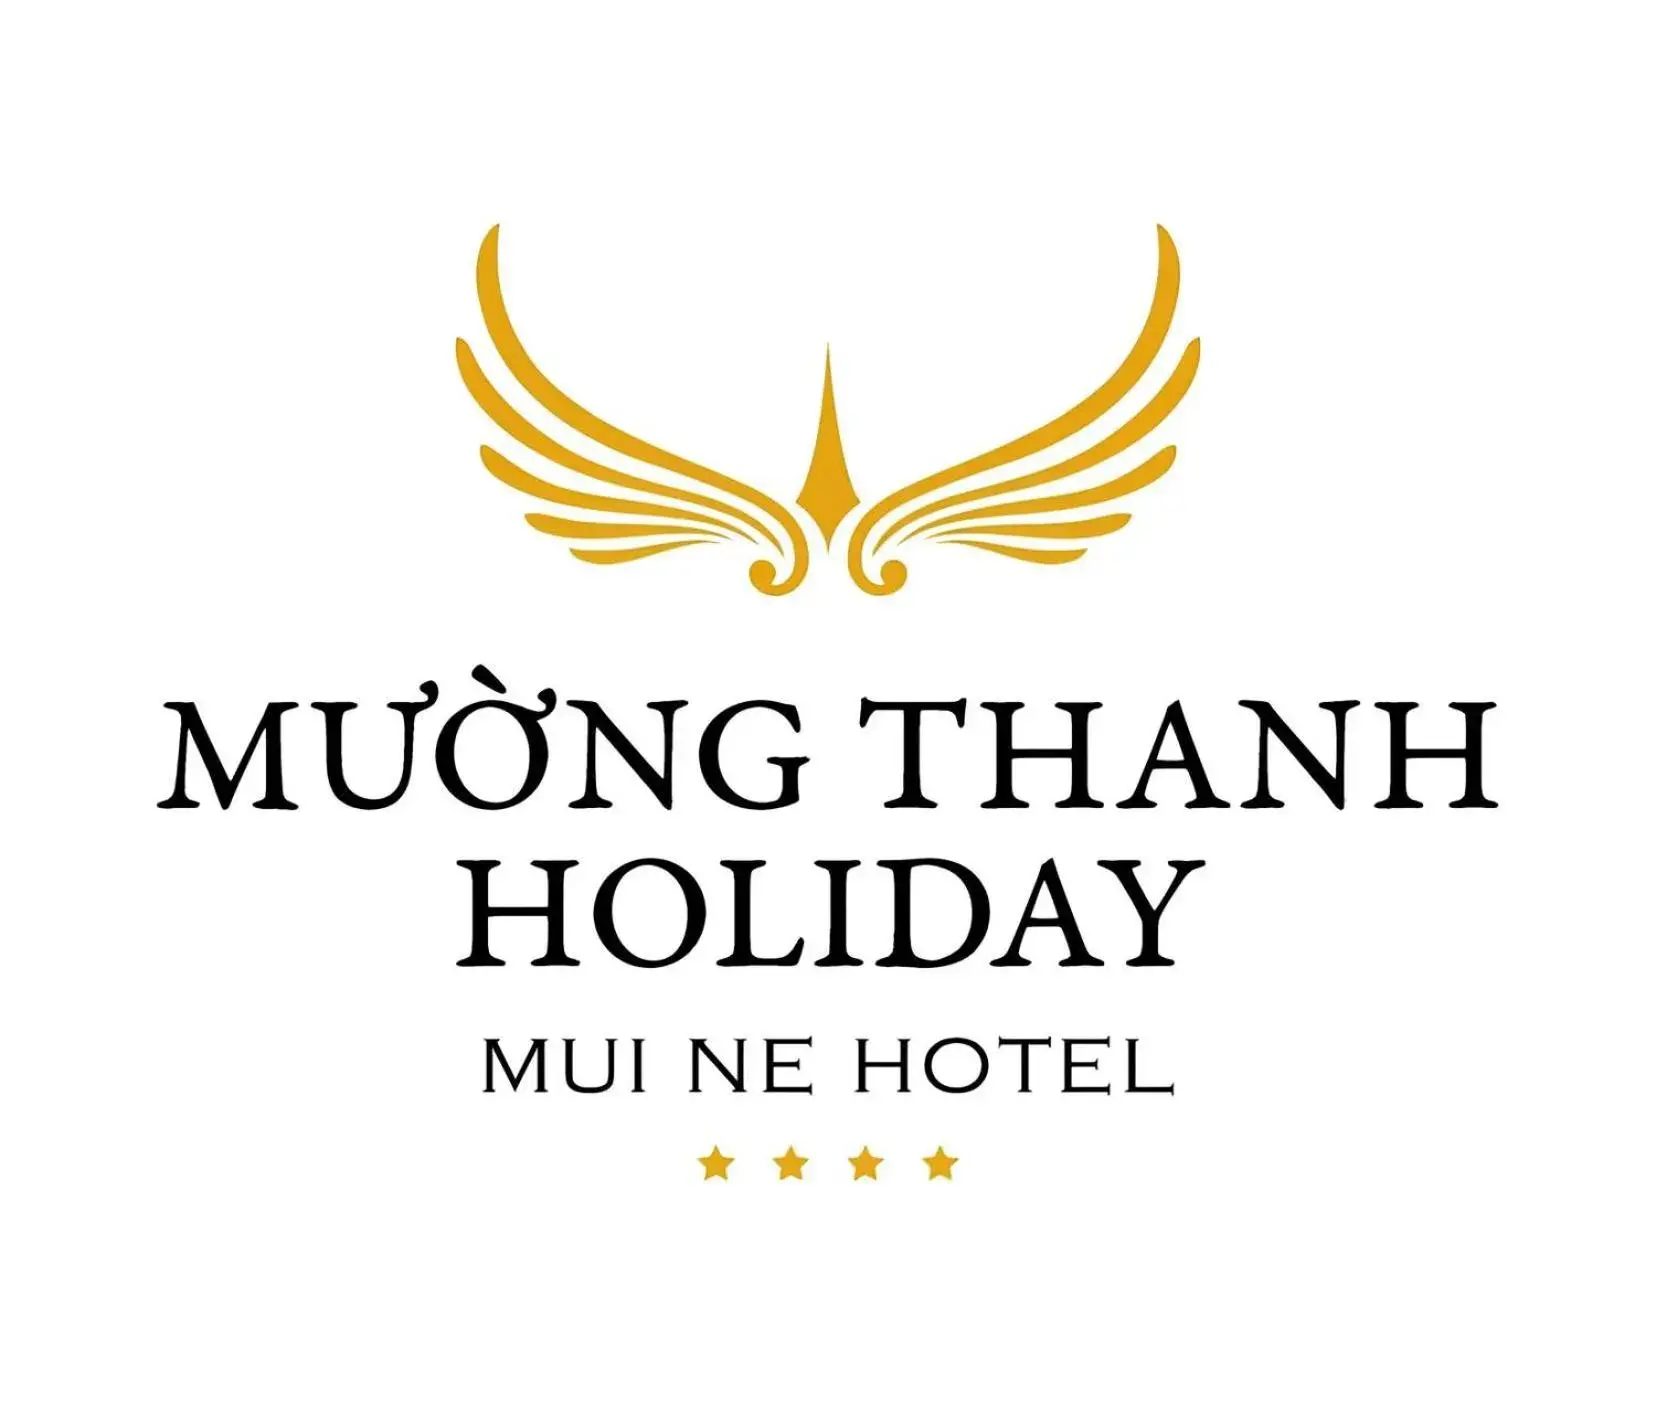 Logo/Certificate/Sign, Property Logo/Sign in Muong Thanh Holiday Mui Ne Hotel